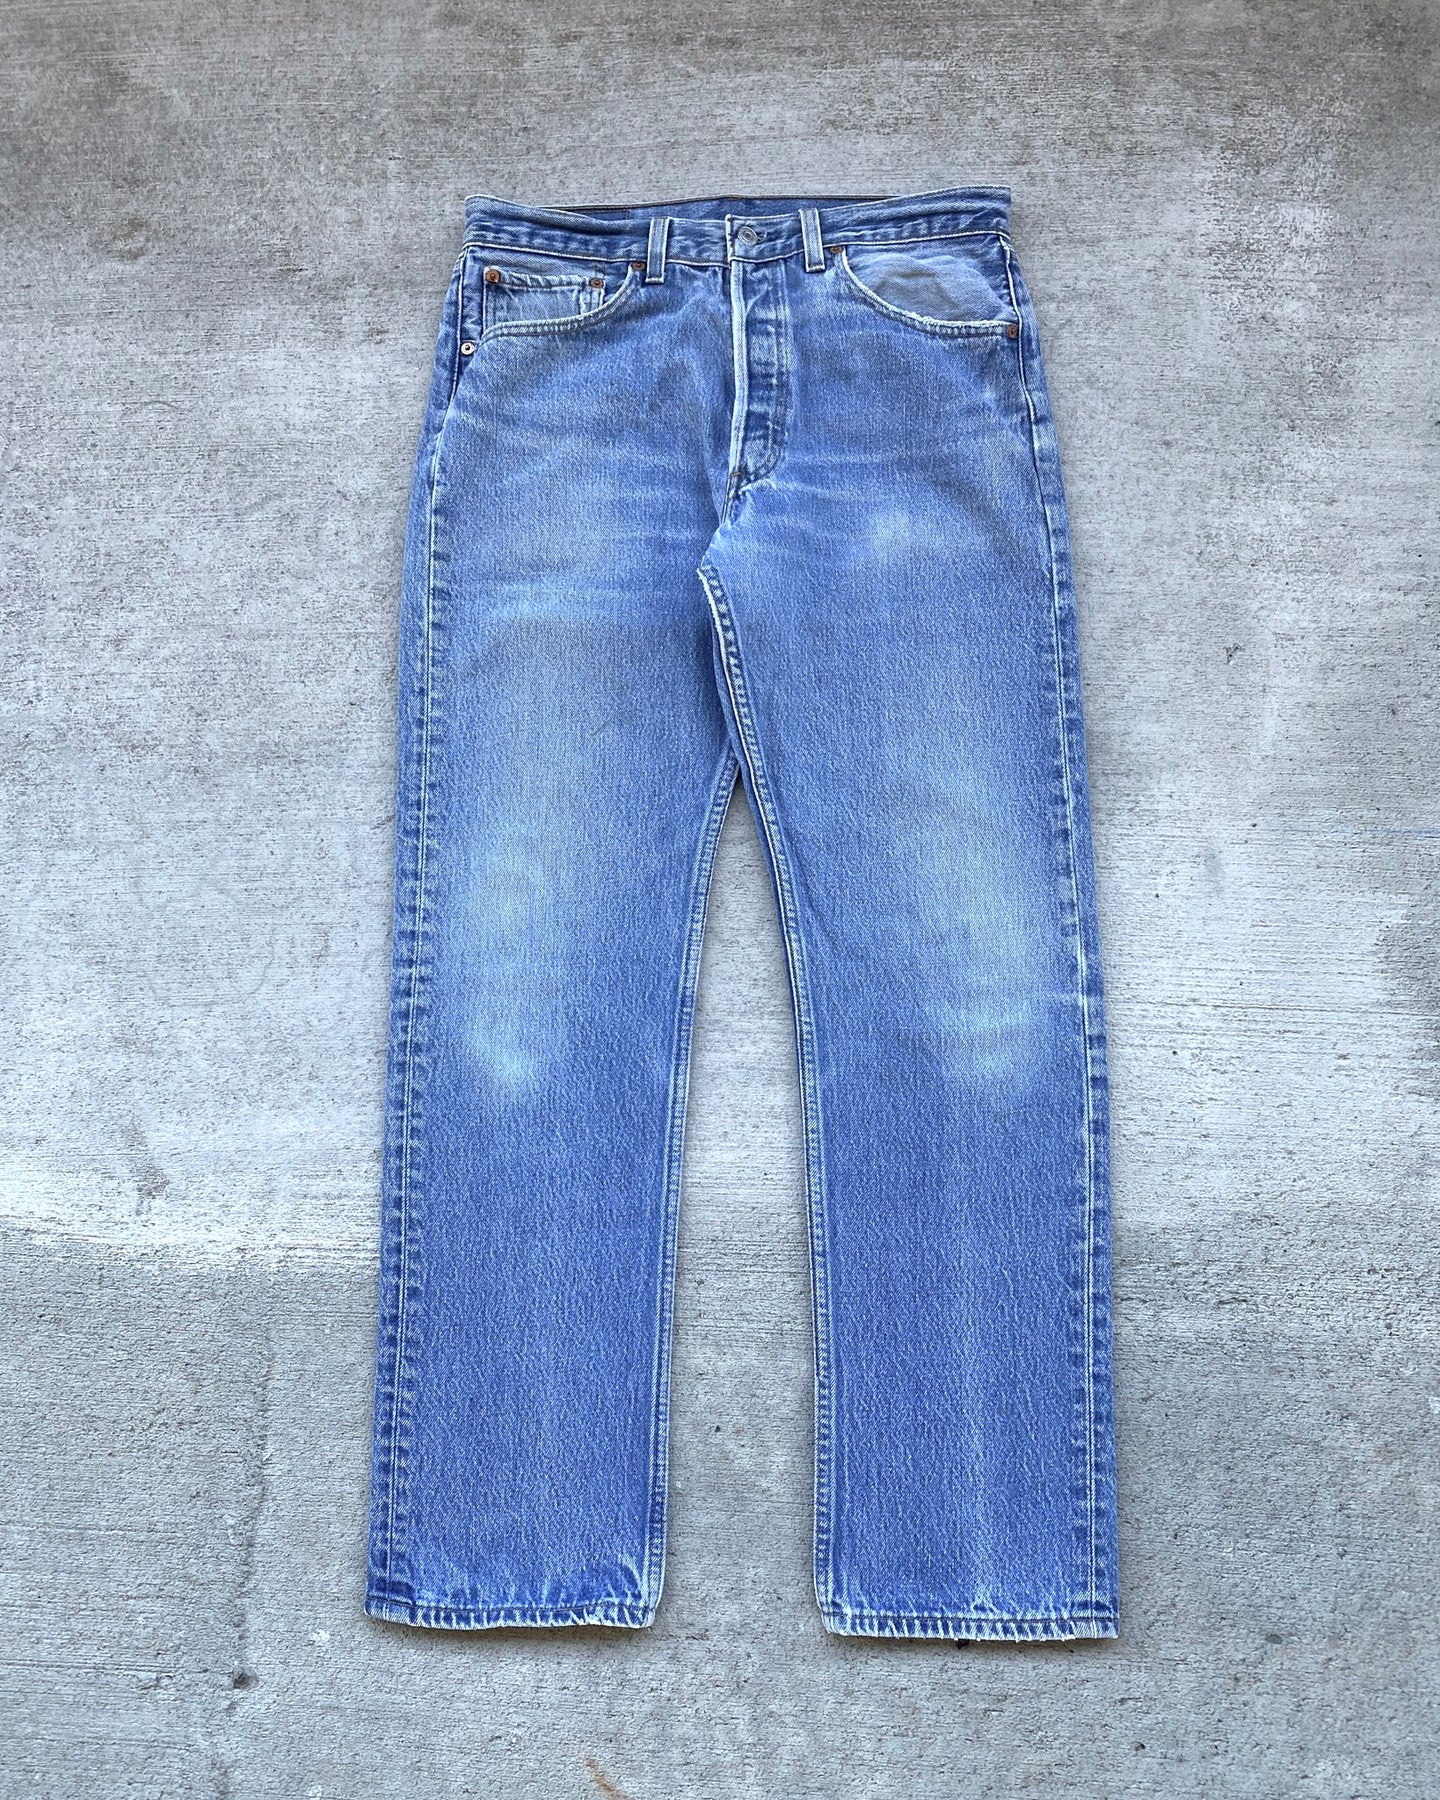 1990s Levi's Well Worn 501 - Size 32 x 30